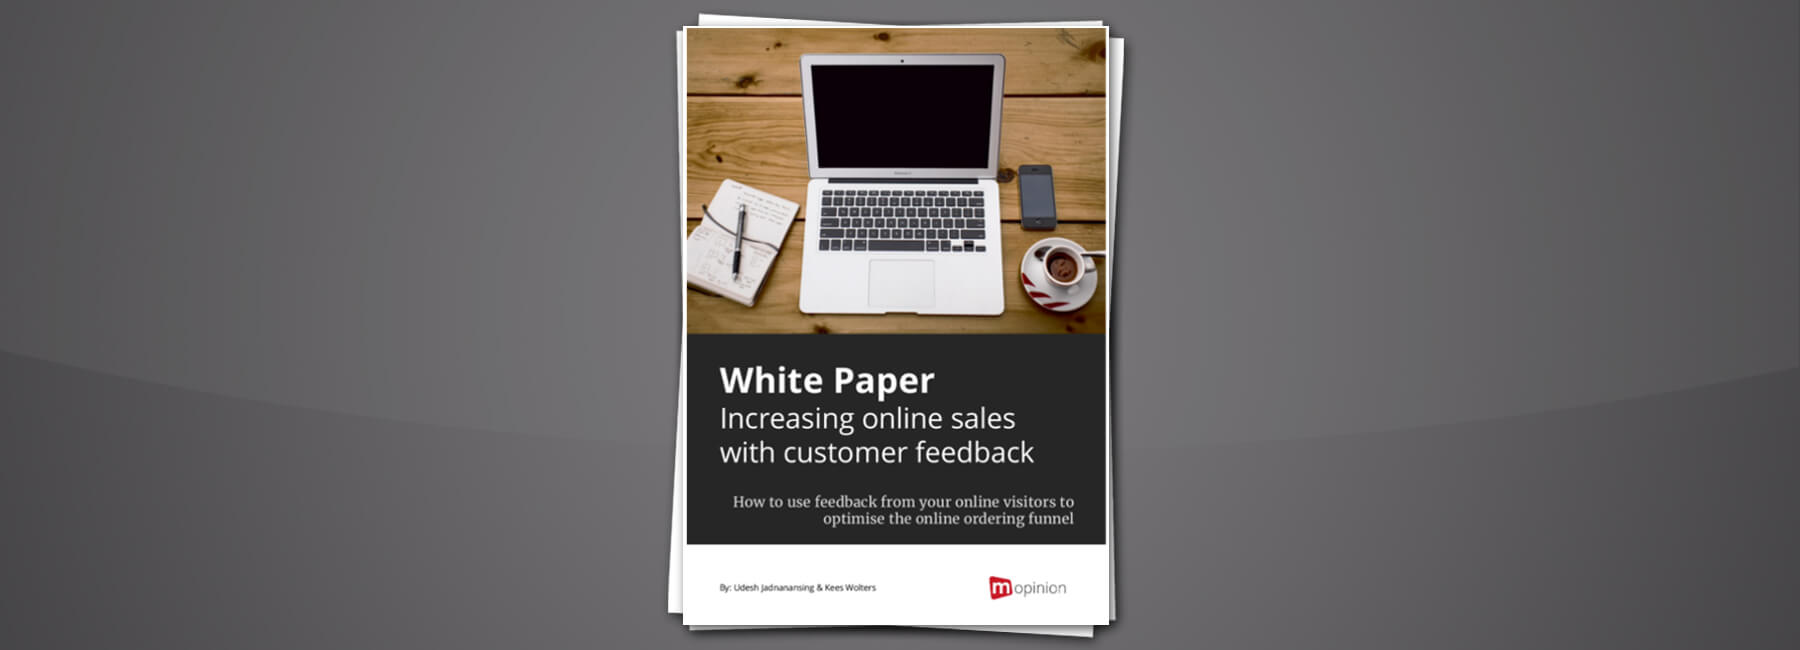 New White Paper: Increasing online sales with customer feedback